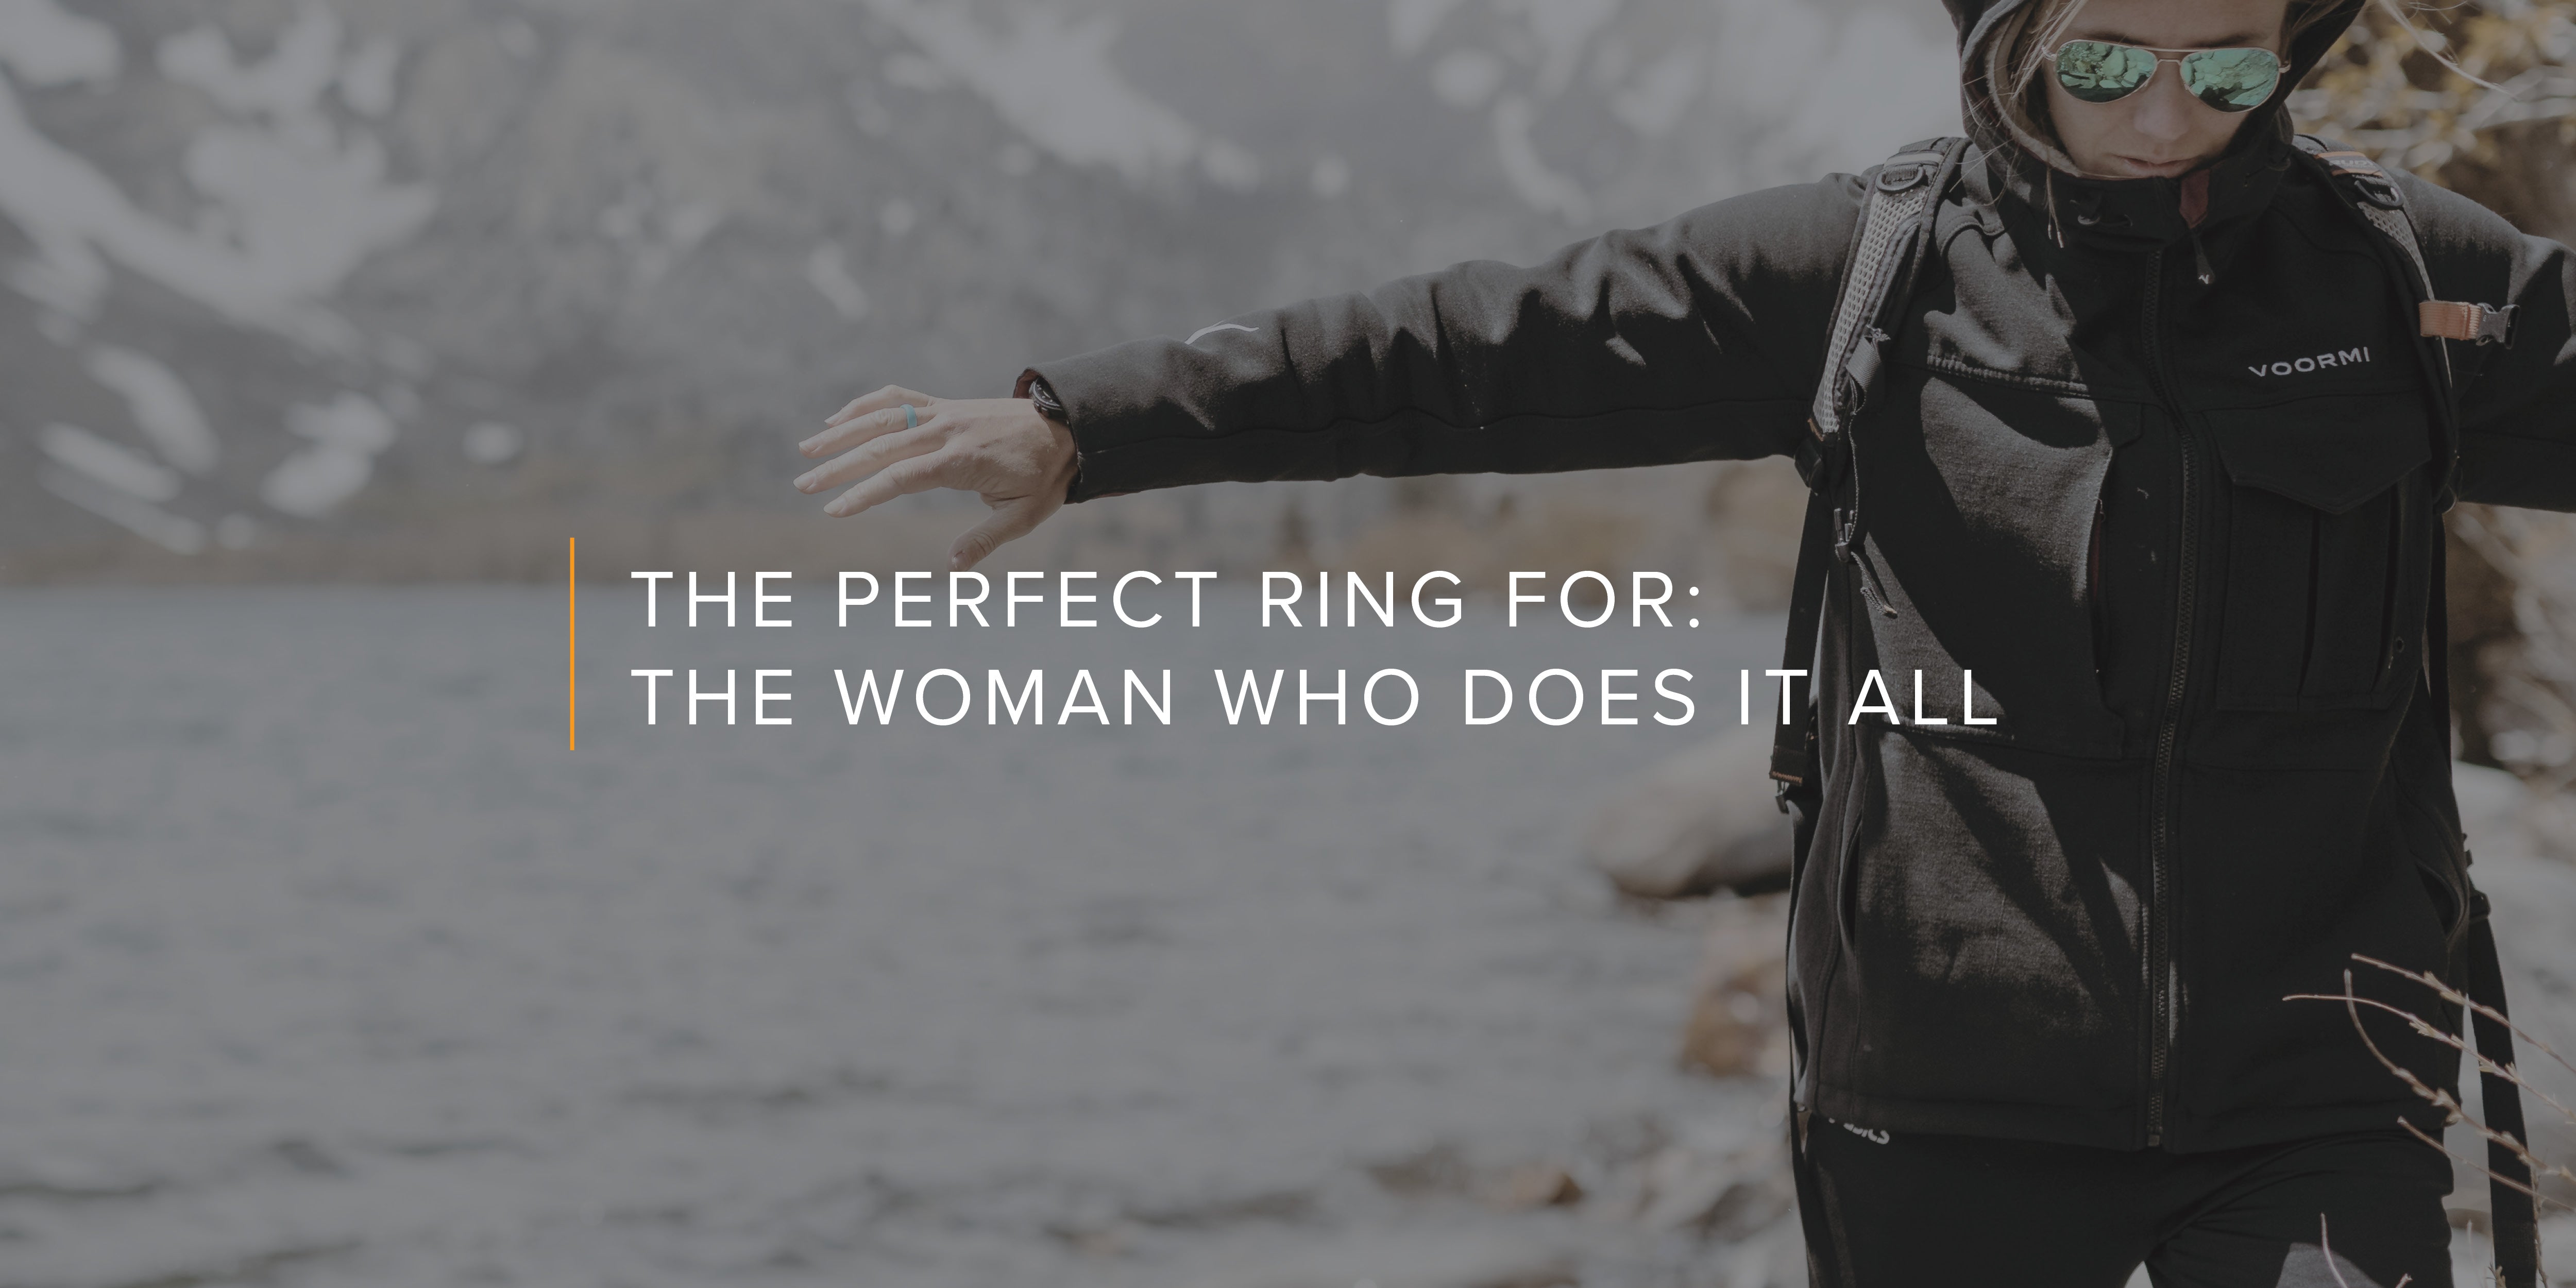 The Perfect Ring For: The Woman Who Does It All